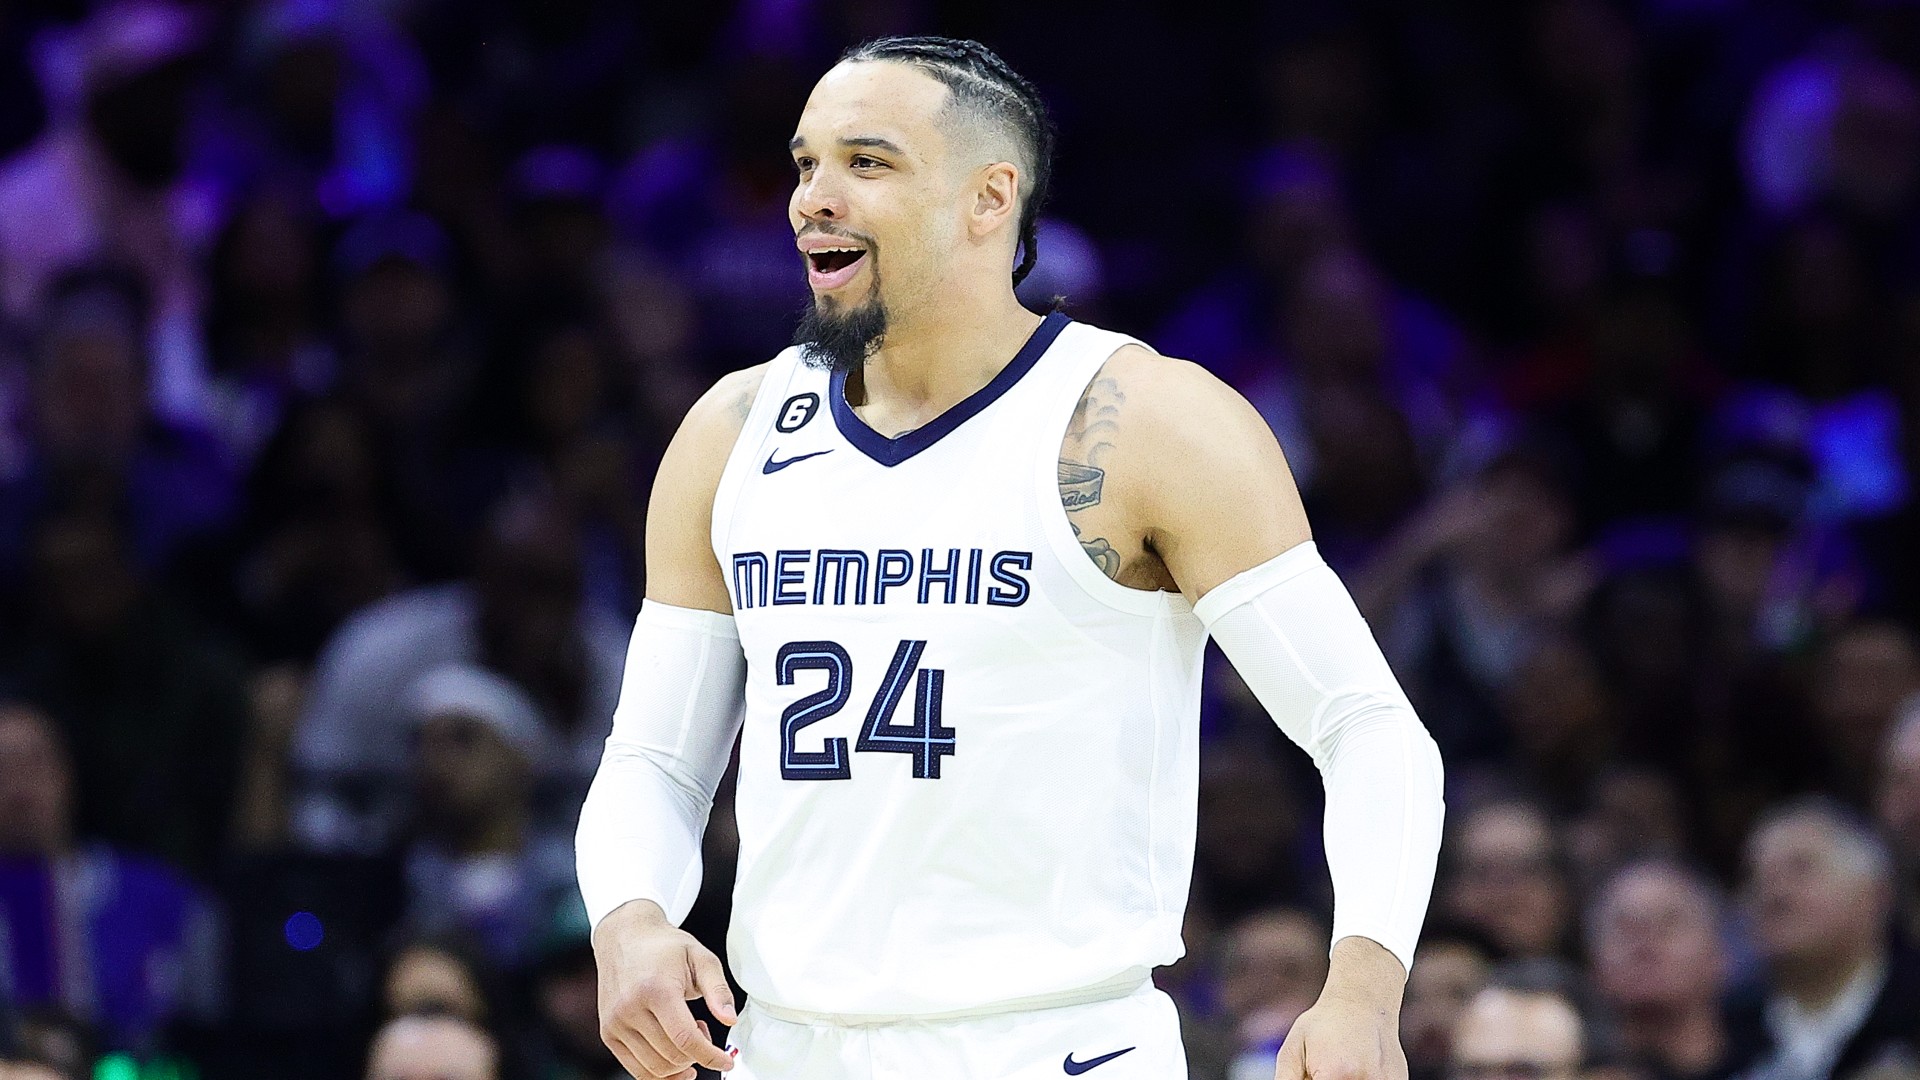 Grizzlies: Dillon Brooks' tenure is over after LeBron James